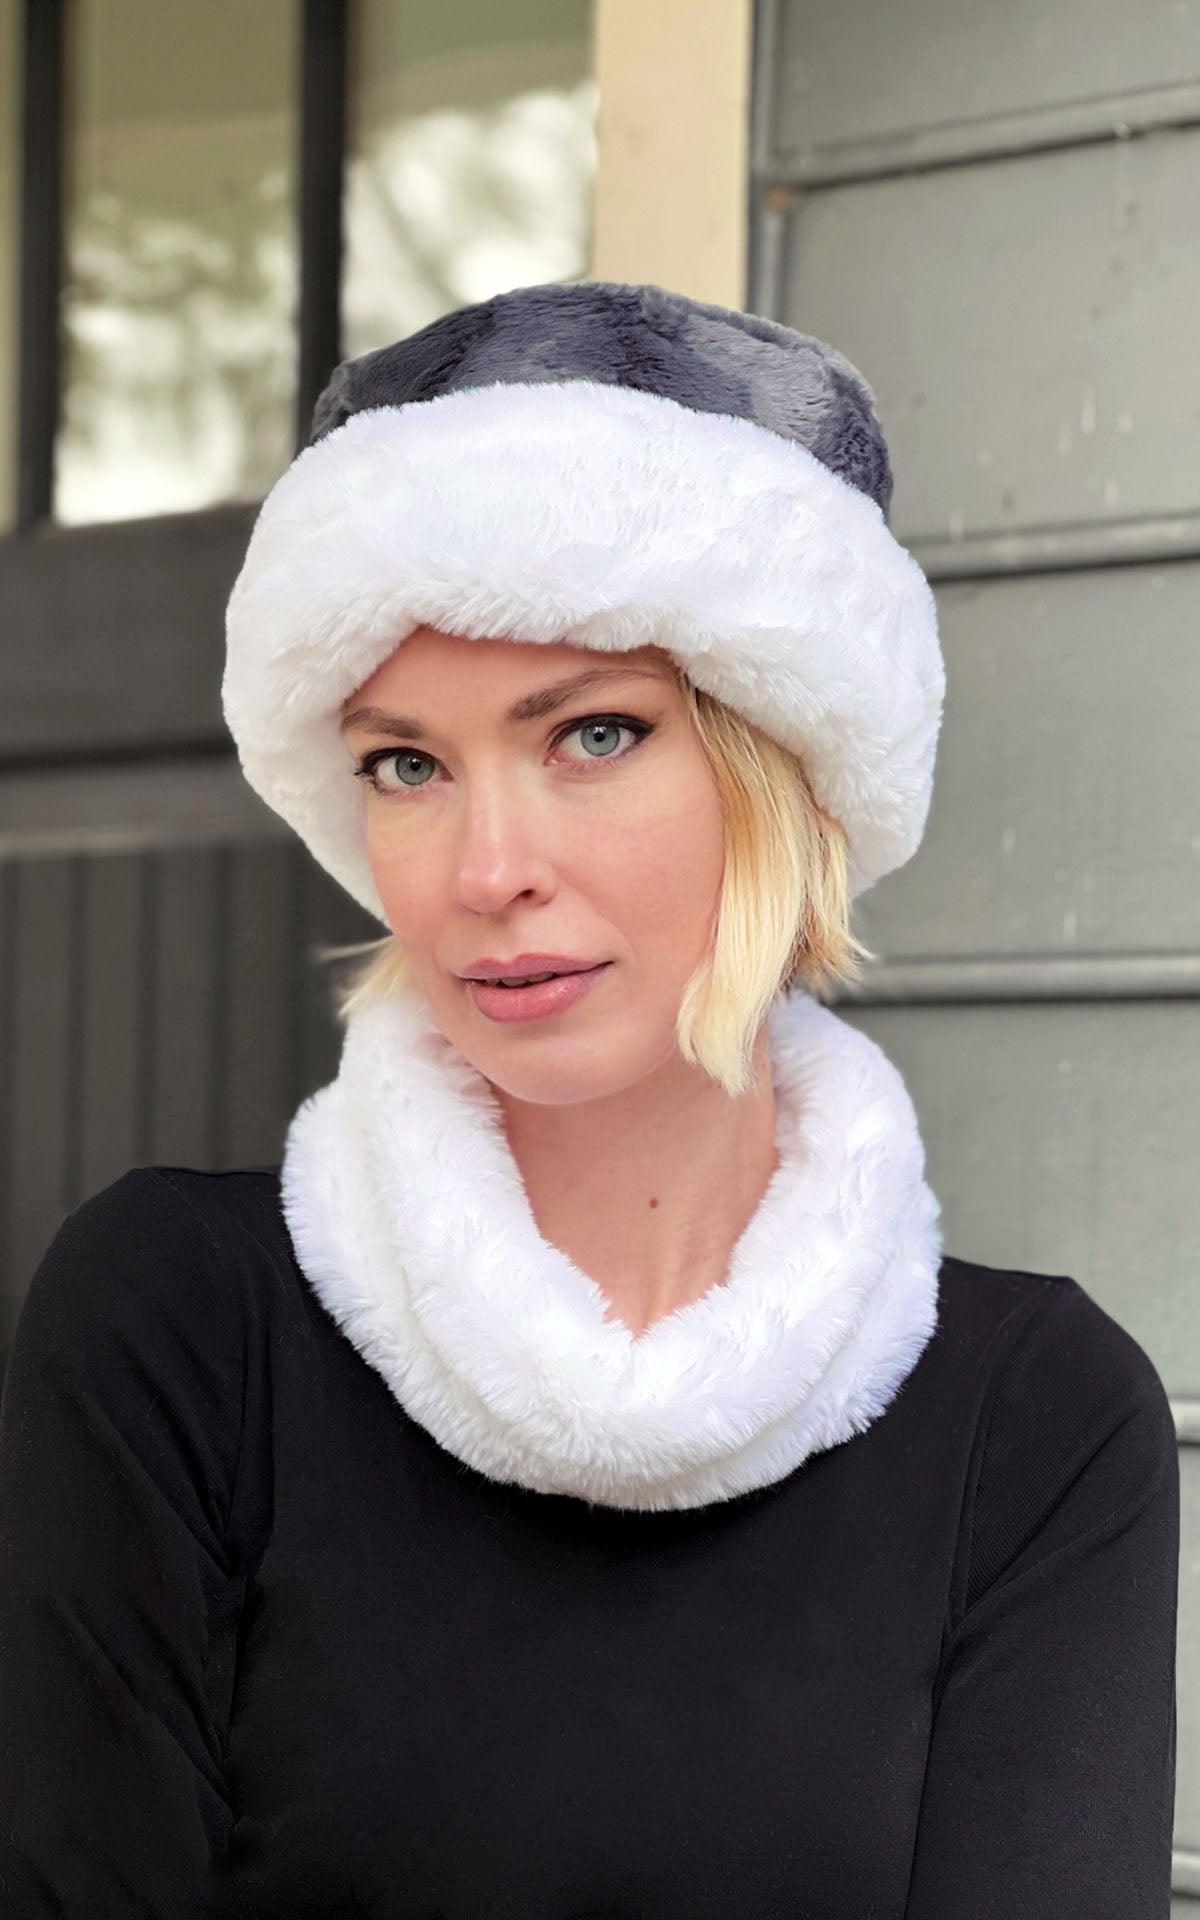 Women’s Neck Warmers and Cowls Collection | Handmade in Seattle WA | Pandemonium Hats